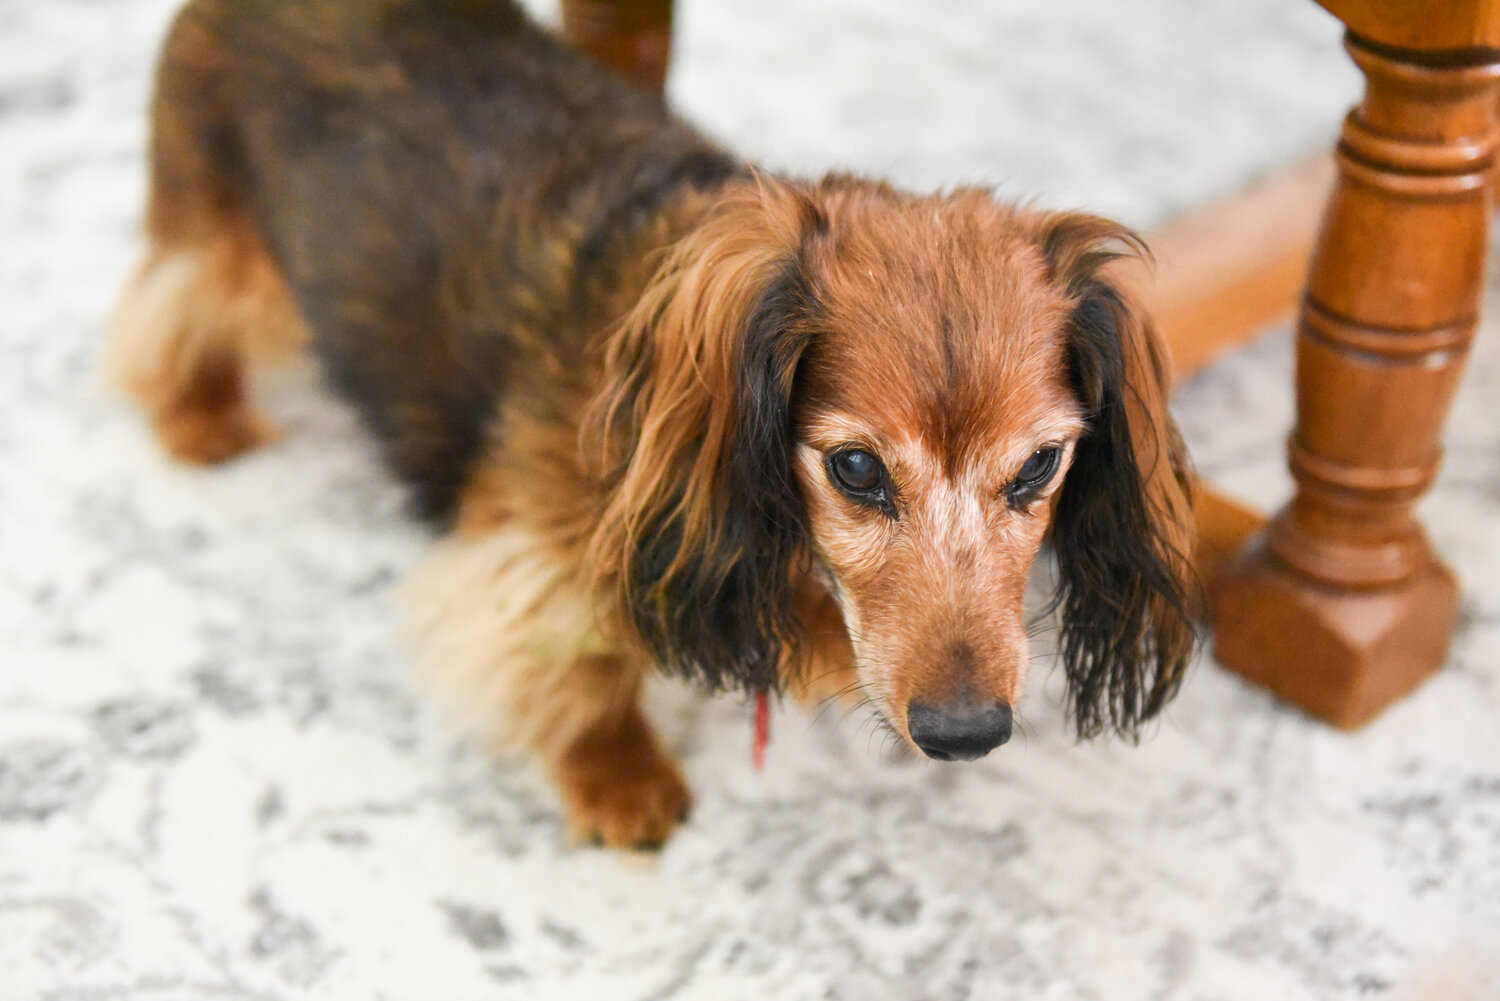 Father William Peckman’s wire-haired Dachshund, and Buddy, plays in the St. Mary Rectory in Shelbina.